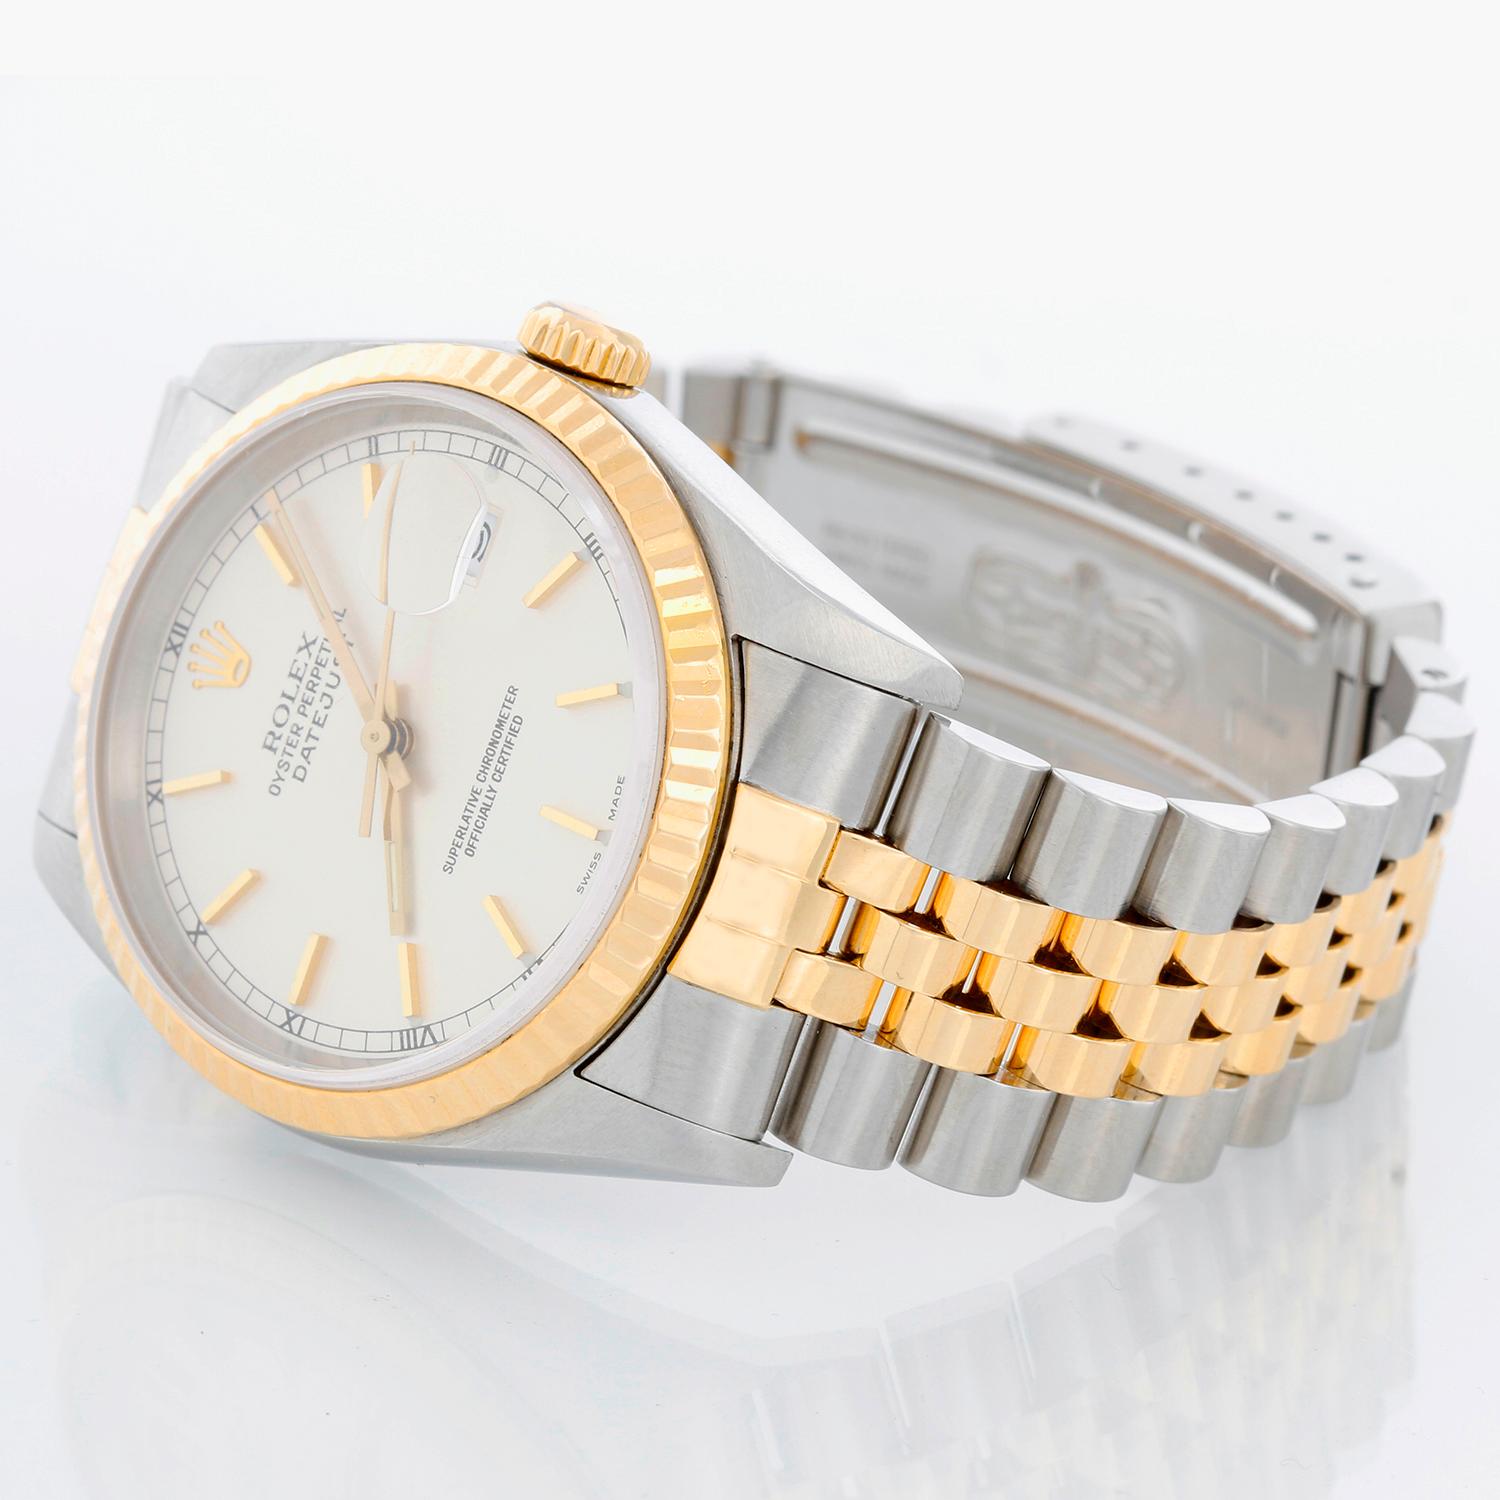 Rolex Datejust 2-Tone Men's Steel & Gold Watch 16233 - Automatic winding, Quickset, sapphire crystal. Stainless steel case with yellow gold bezel (36mm diameter). Silver stick dial . Stainless steel and 18k yellow gold Jubilee bracelet. Pre-owned